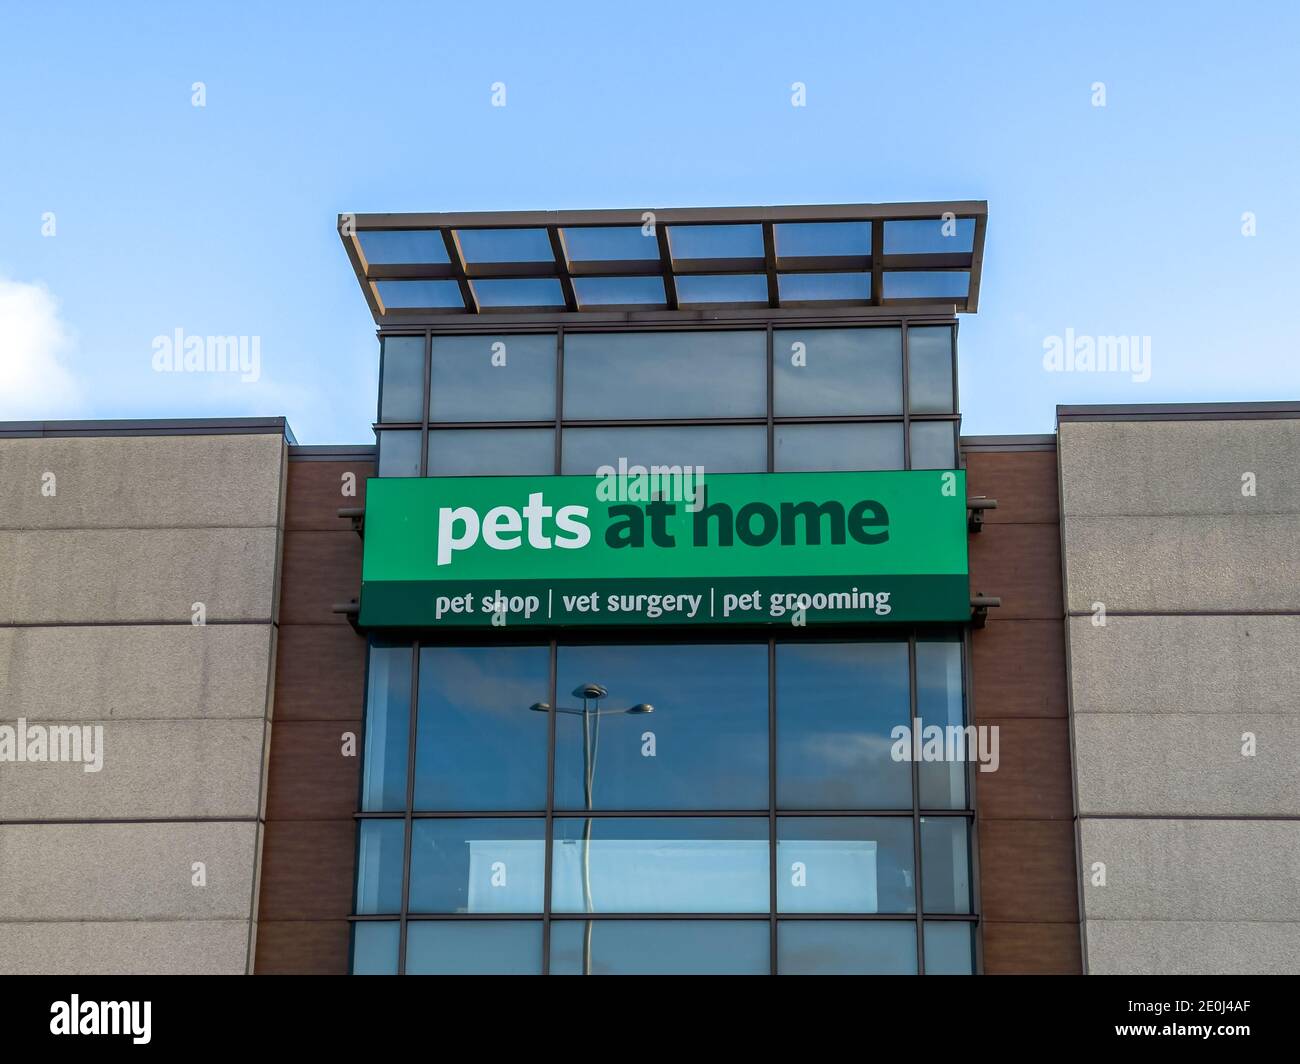 Belfast, Northern Ireland - Dec 19, 2020: The sign for Pets at Home store Stock Photo